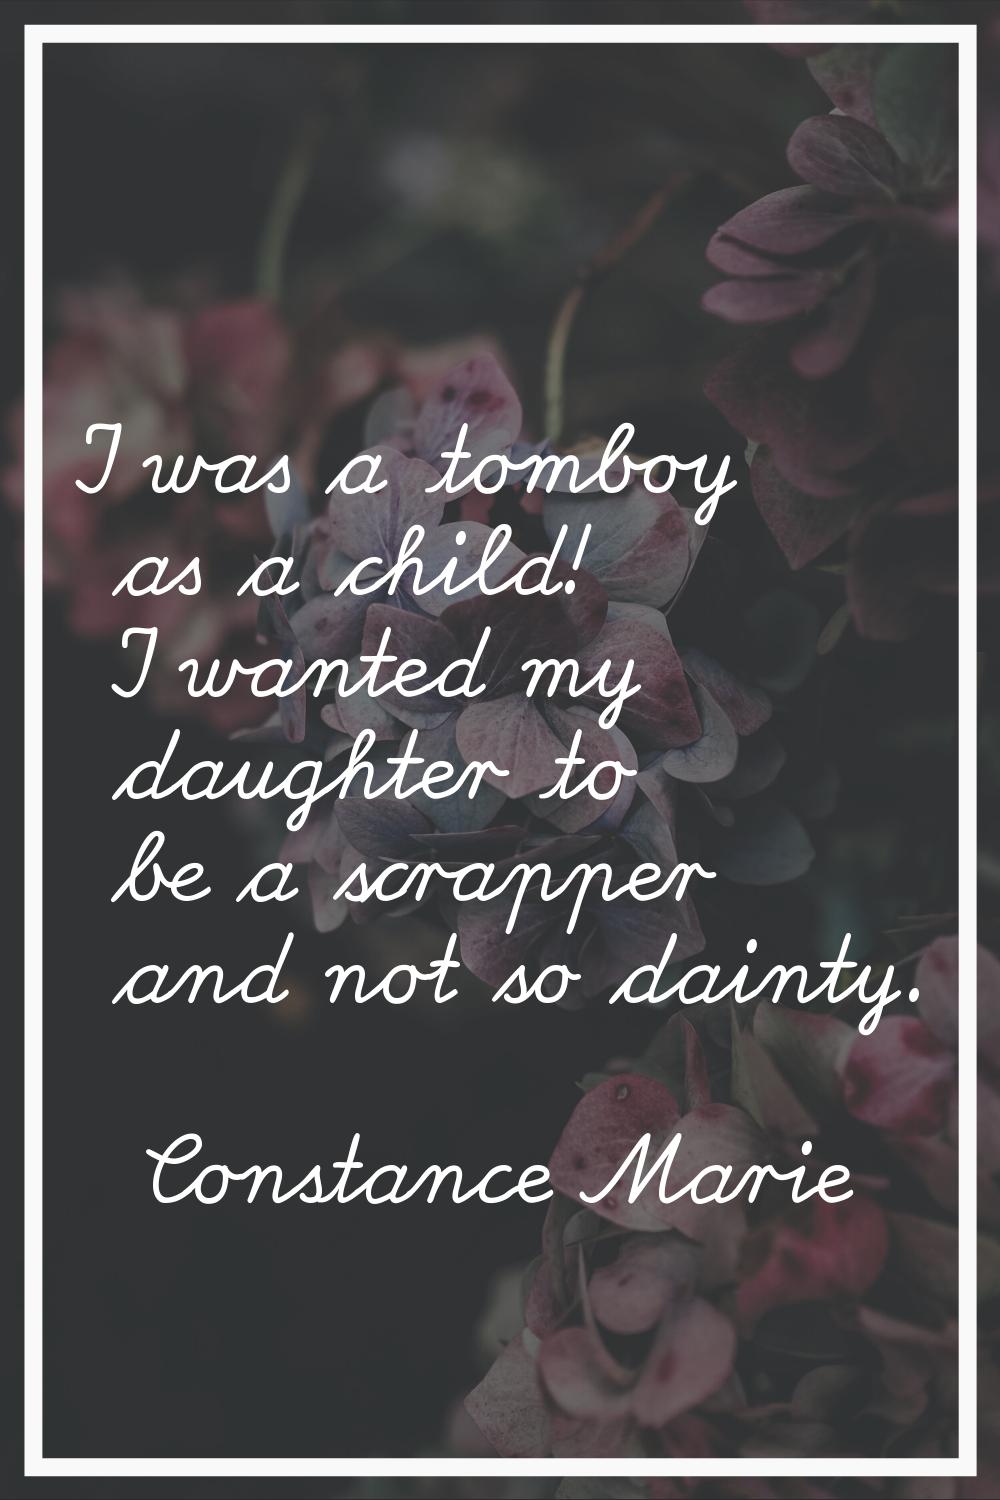 I was a tomboy as a child! I wanted my daughter to be a scrapper and not so dainty.